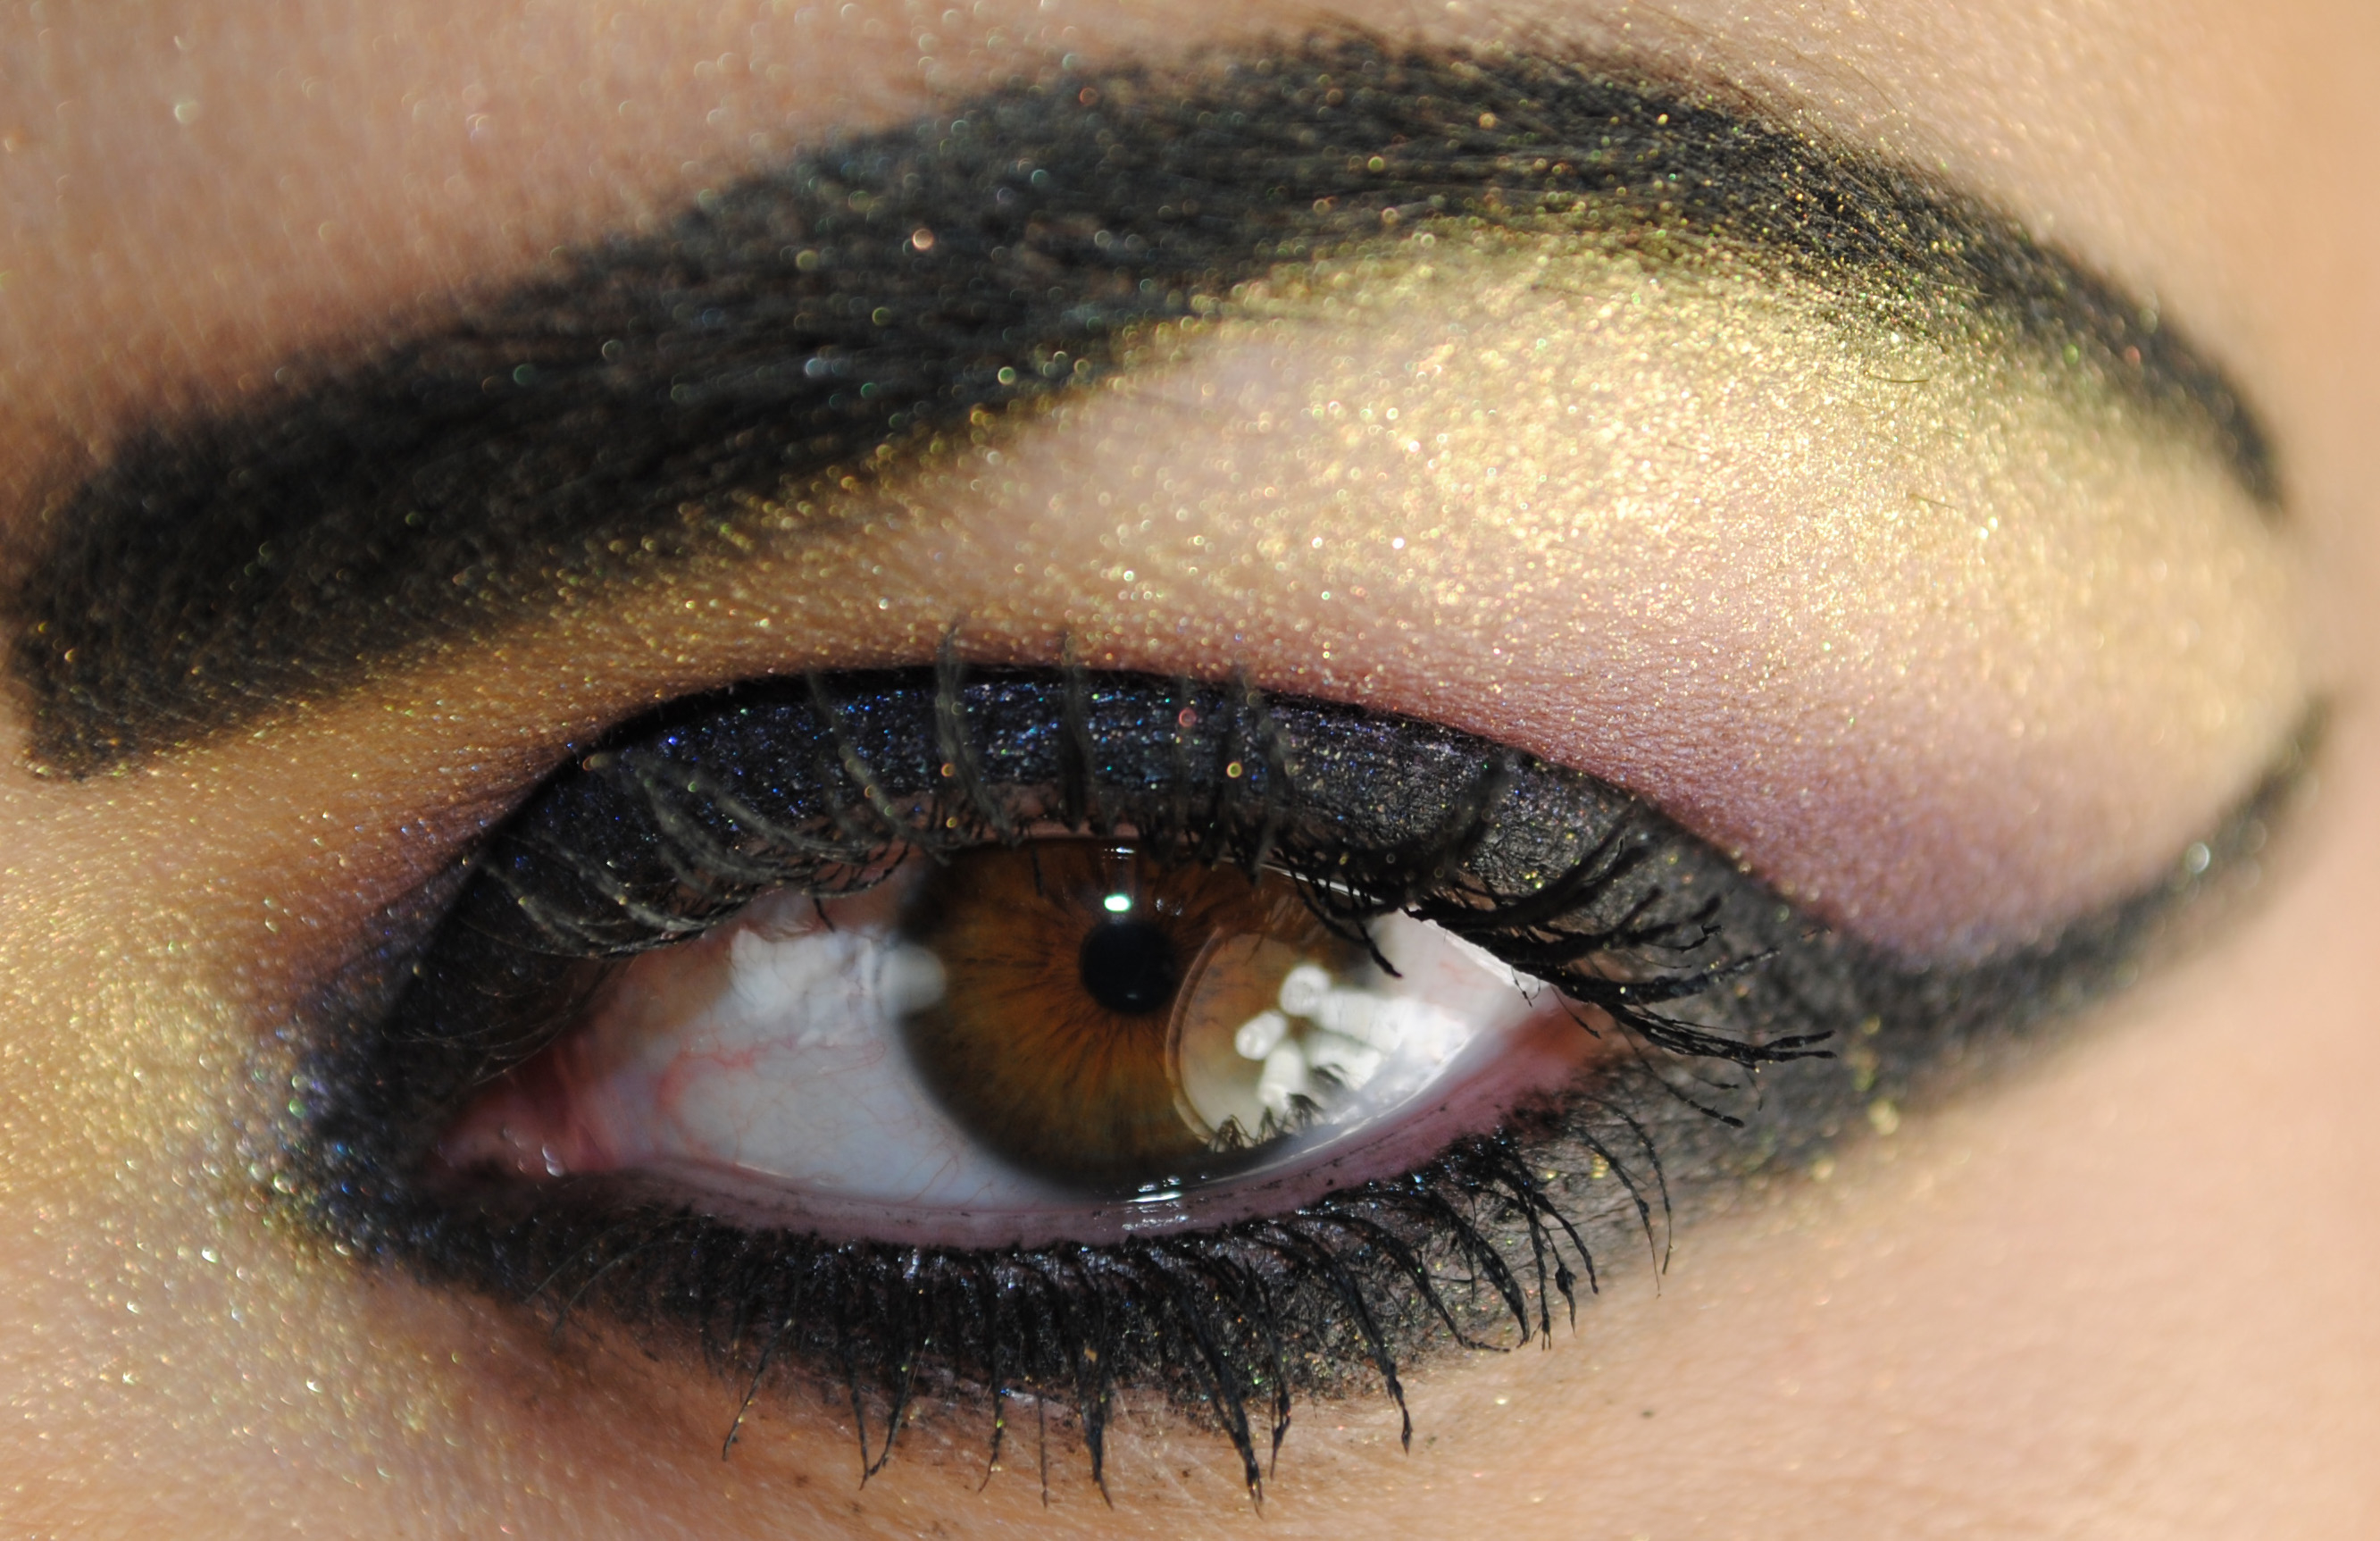 Egyptian Eye Makeup The Crazy Origin Of The Eyeliner Traces Back To Ancient Egypt Y101fm